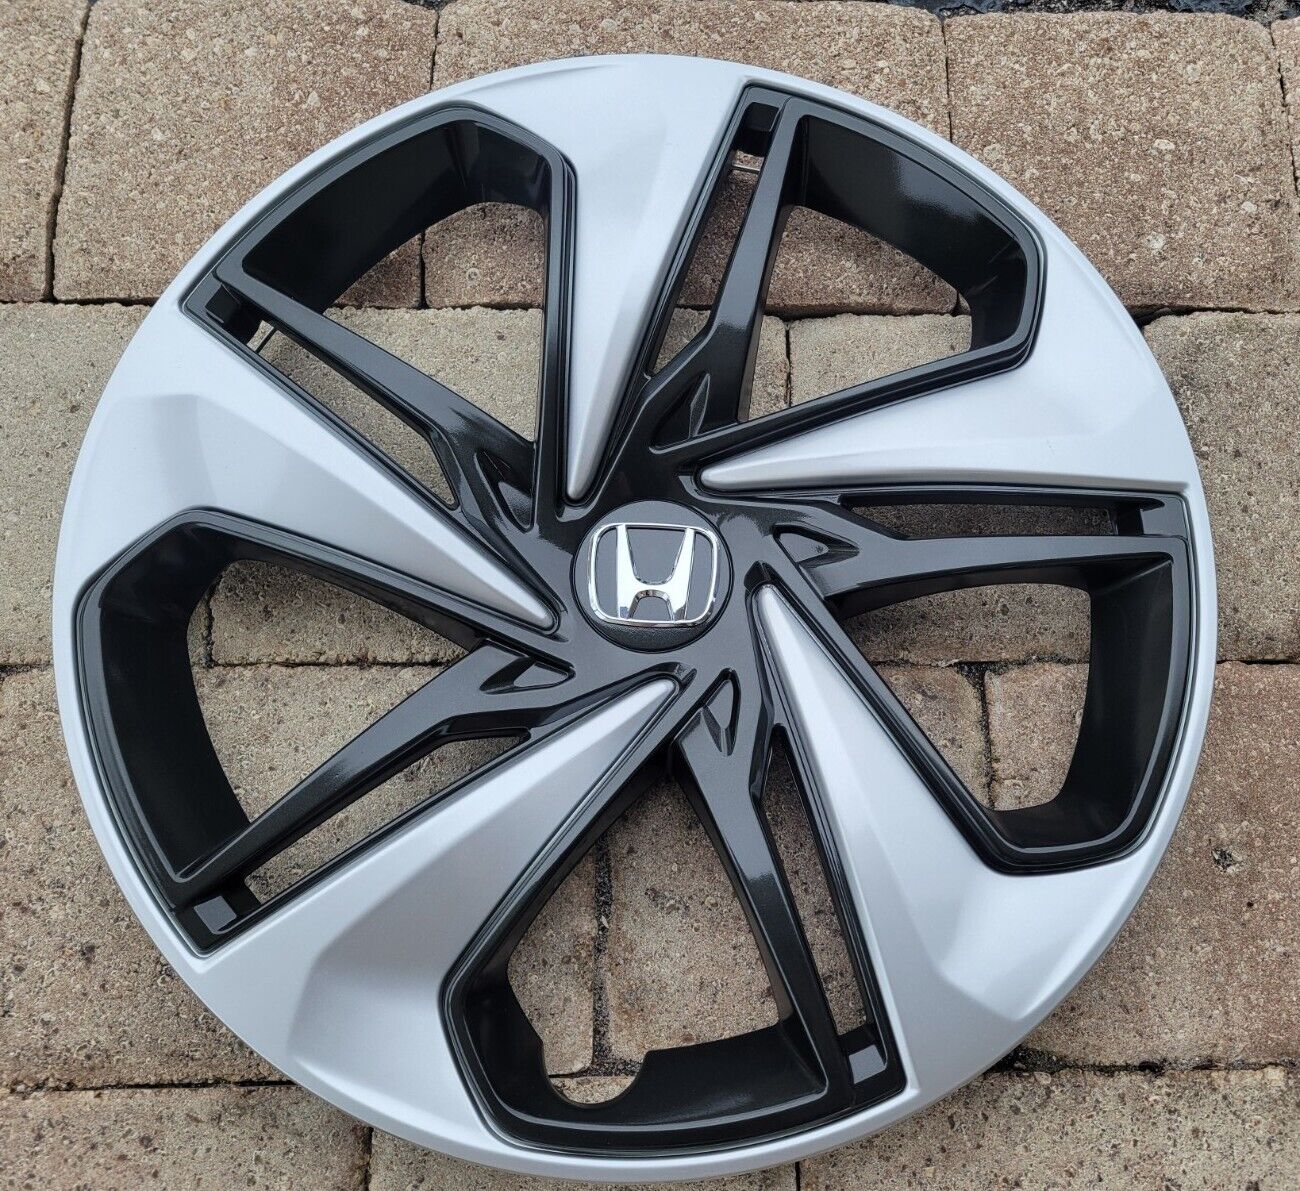 NEW SILVER/GREY HUBCAP (1) FITS CIVIC 2019 20 21 16\